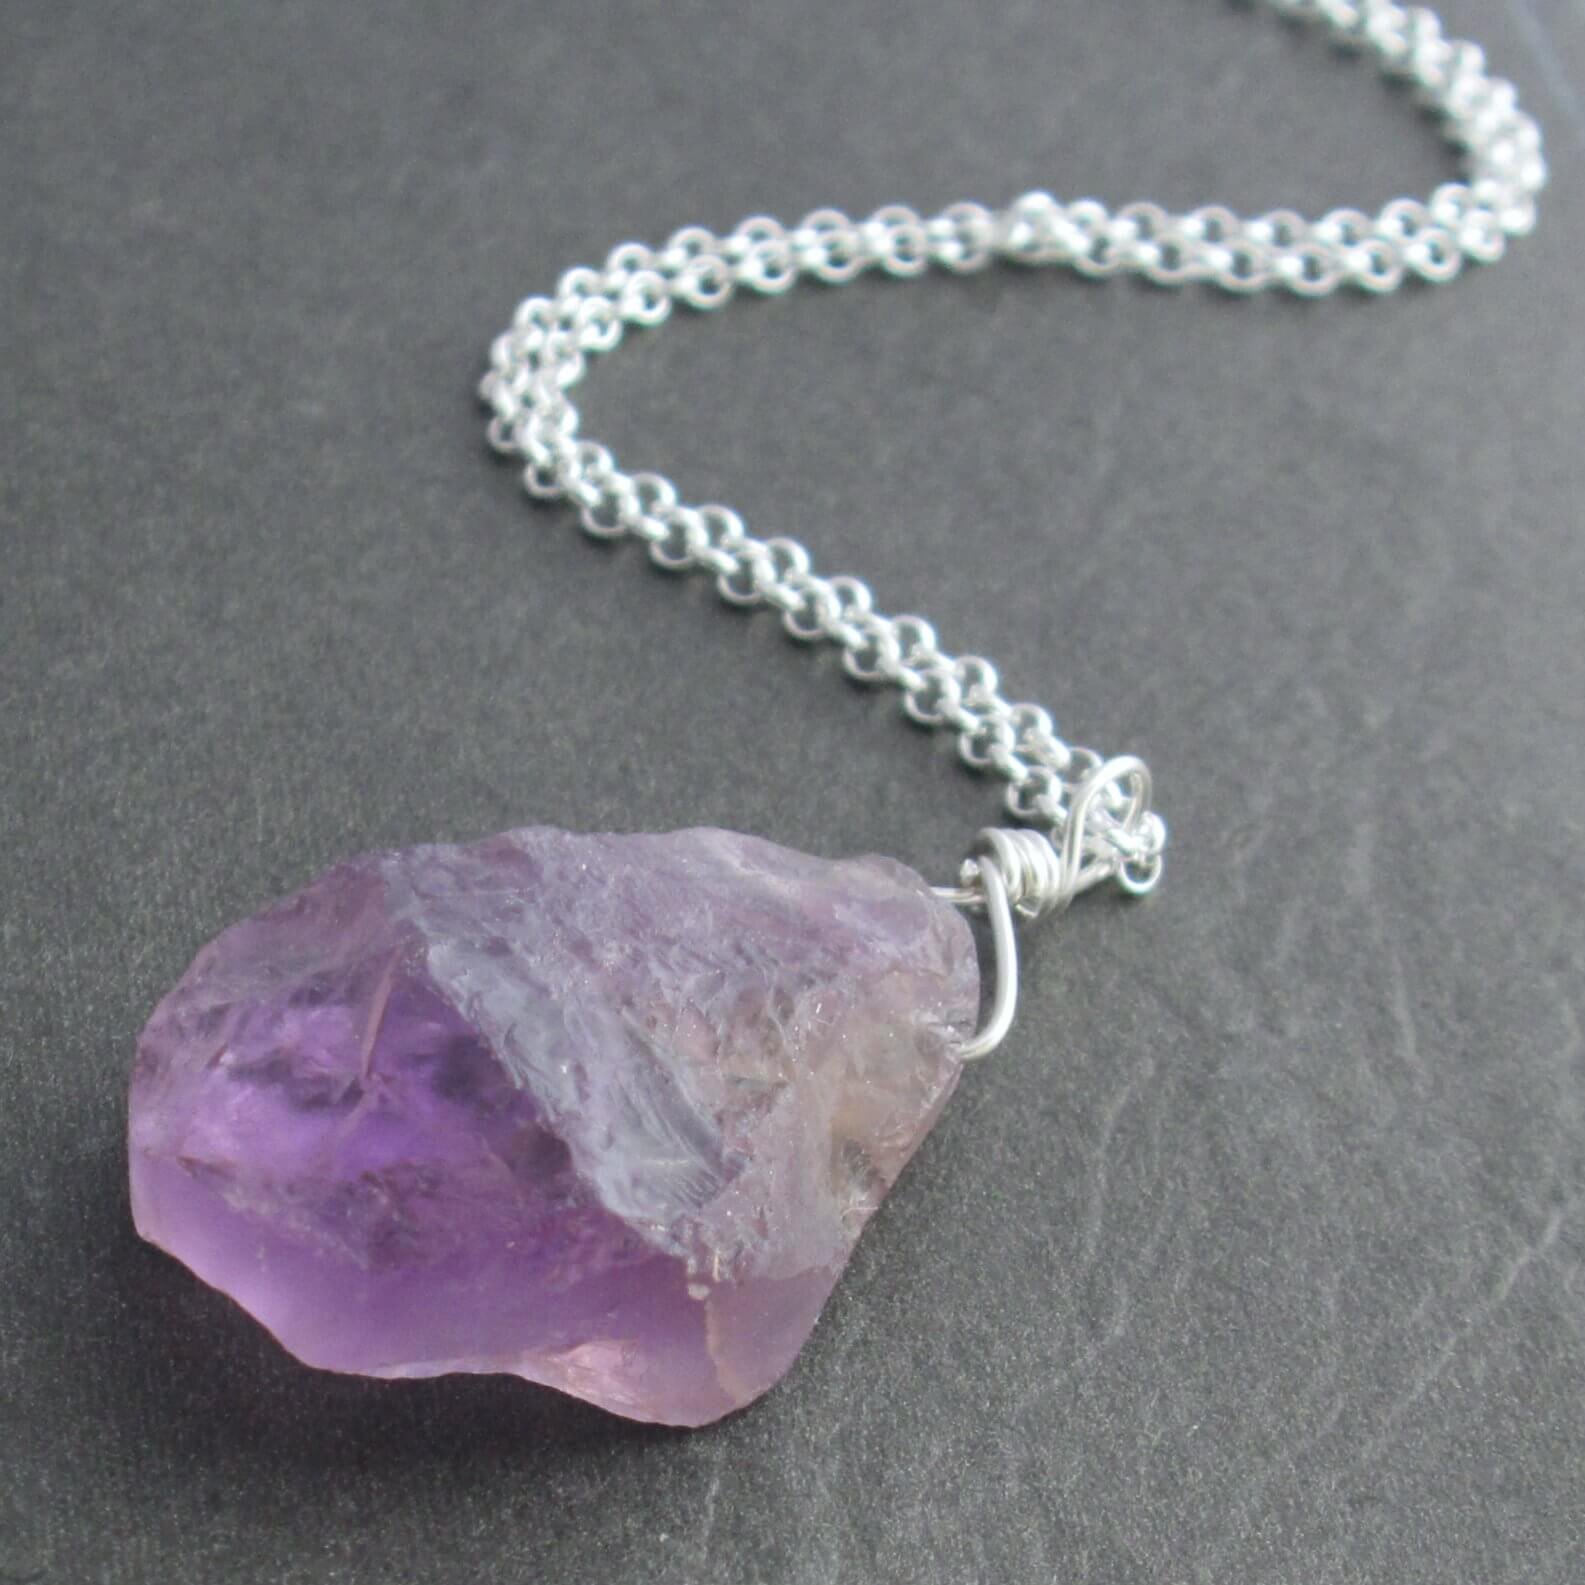 Ametrine Quartz Pendant Woman Pendant Necklace Wire Wrapped Pendant Sterling Silver Plated Gemstone Pendant Gift For Her Jewellery